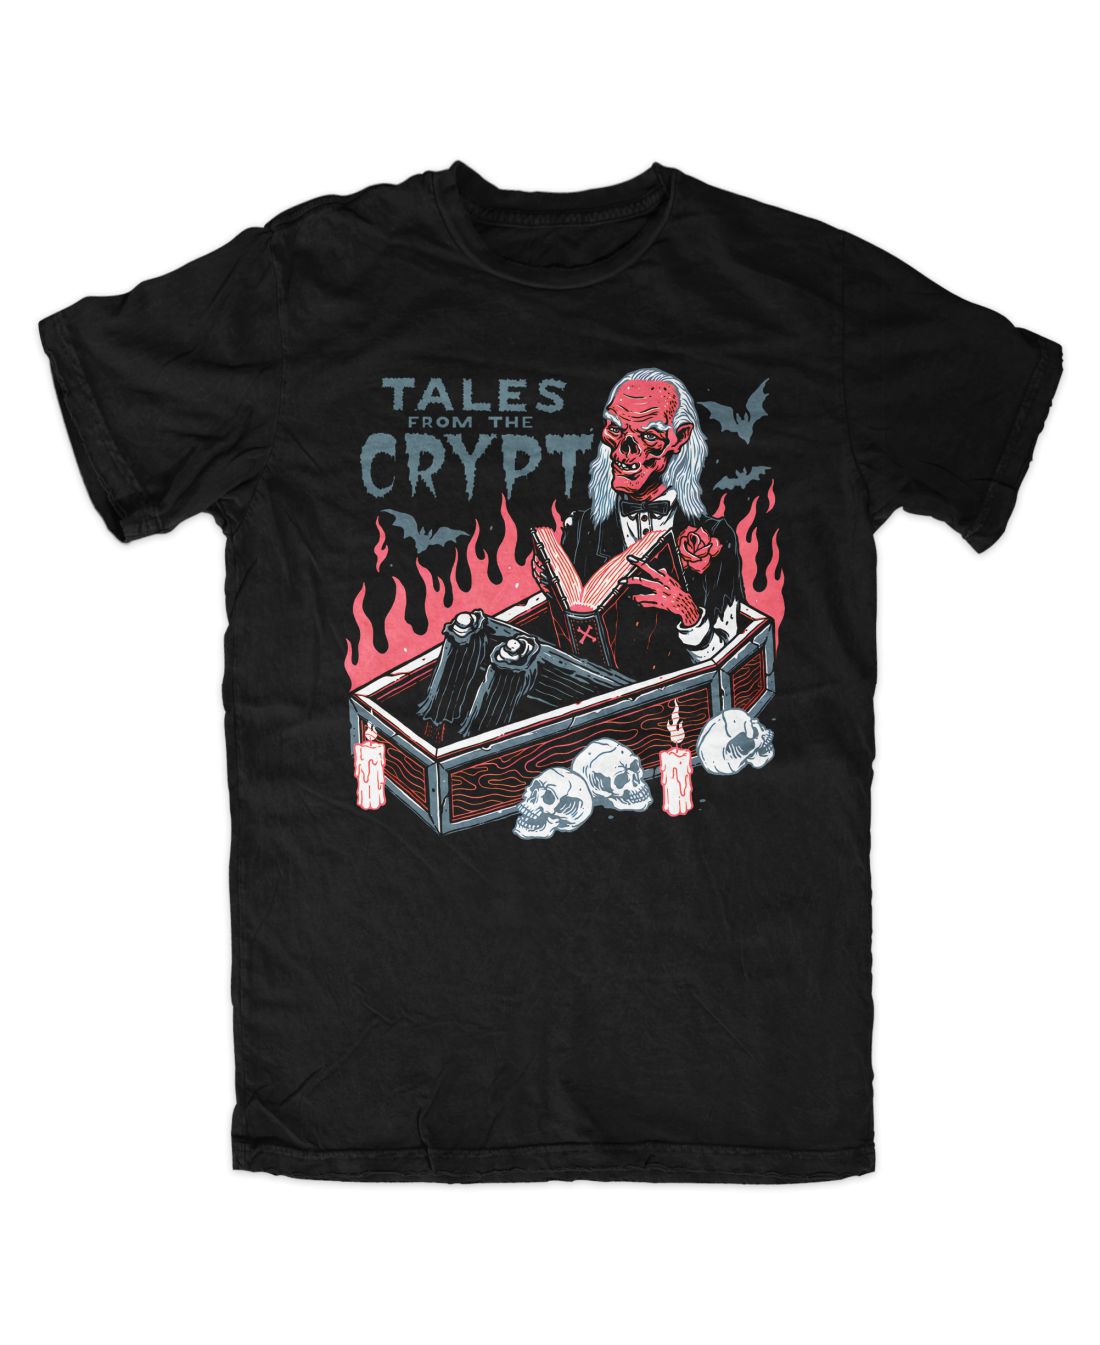 Tales From The Crypt 001